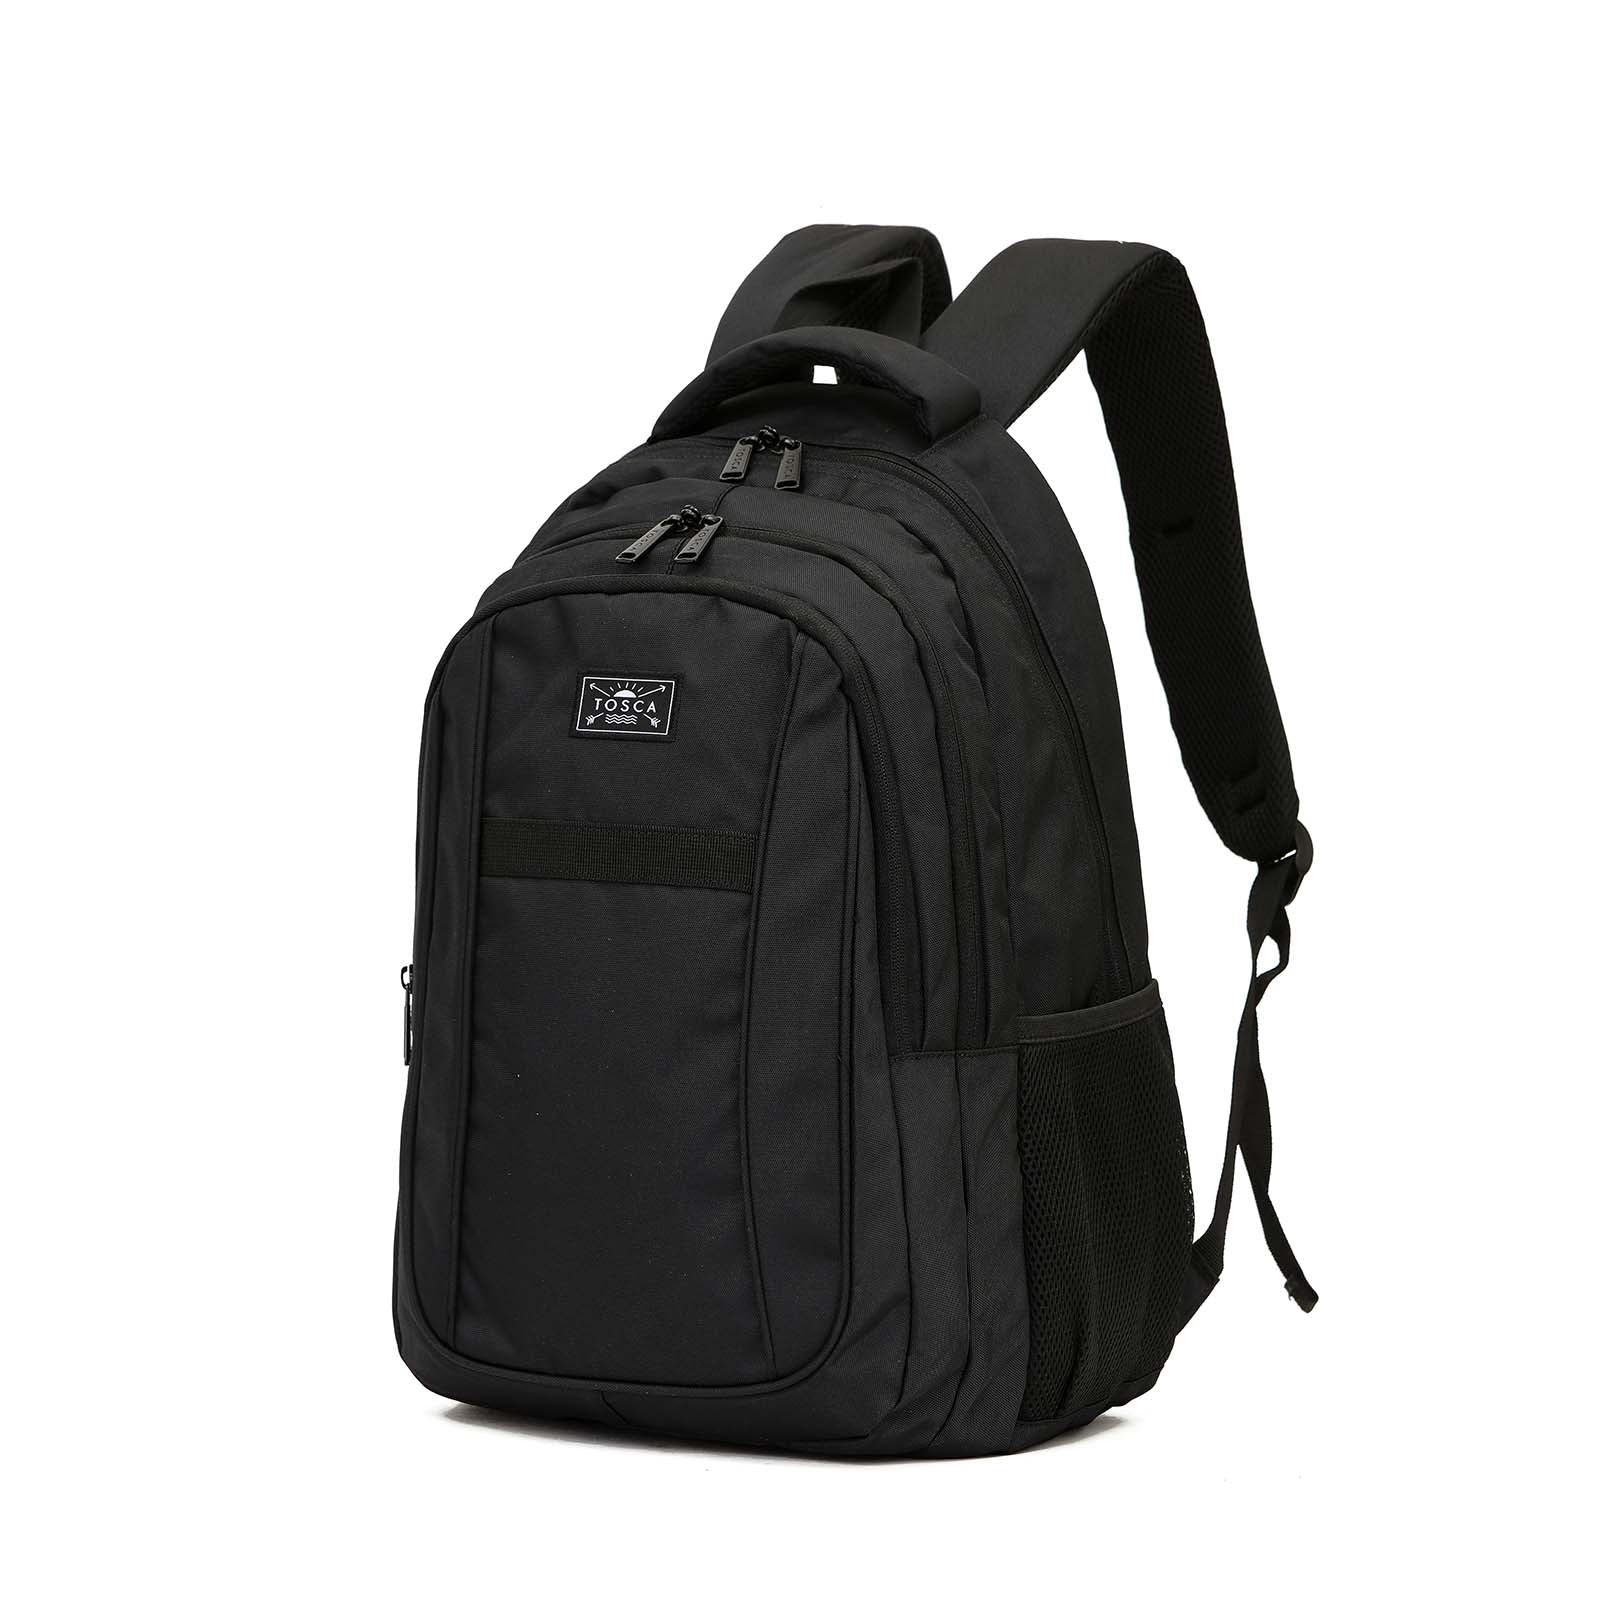 tosca-multi-compartment-laptop-backpack-35l-black-front-angle